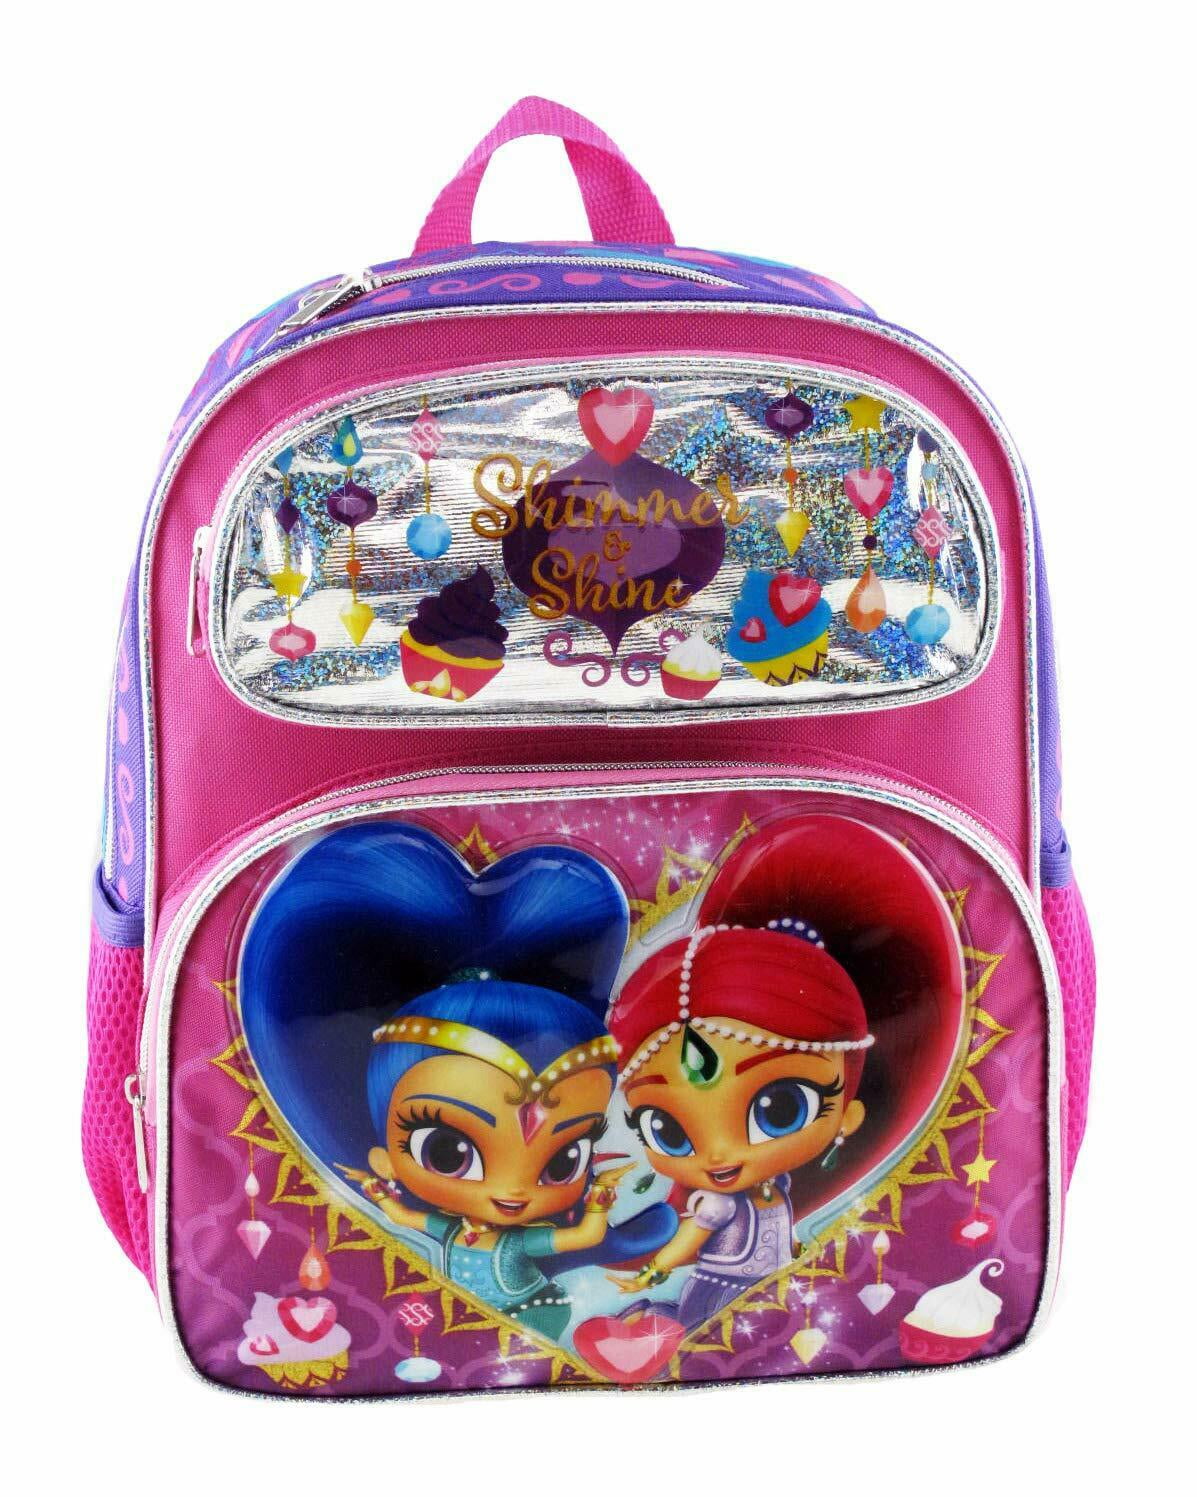 Shimmer and Shine Girls Deluxe Backpack Lunch Rucksack Travel School Bag WISH 